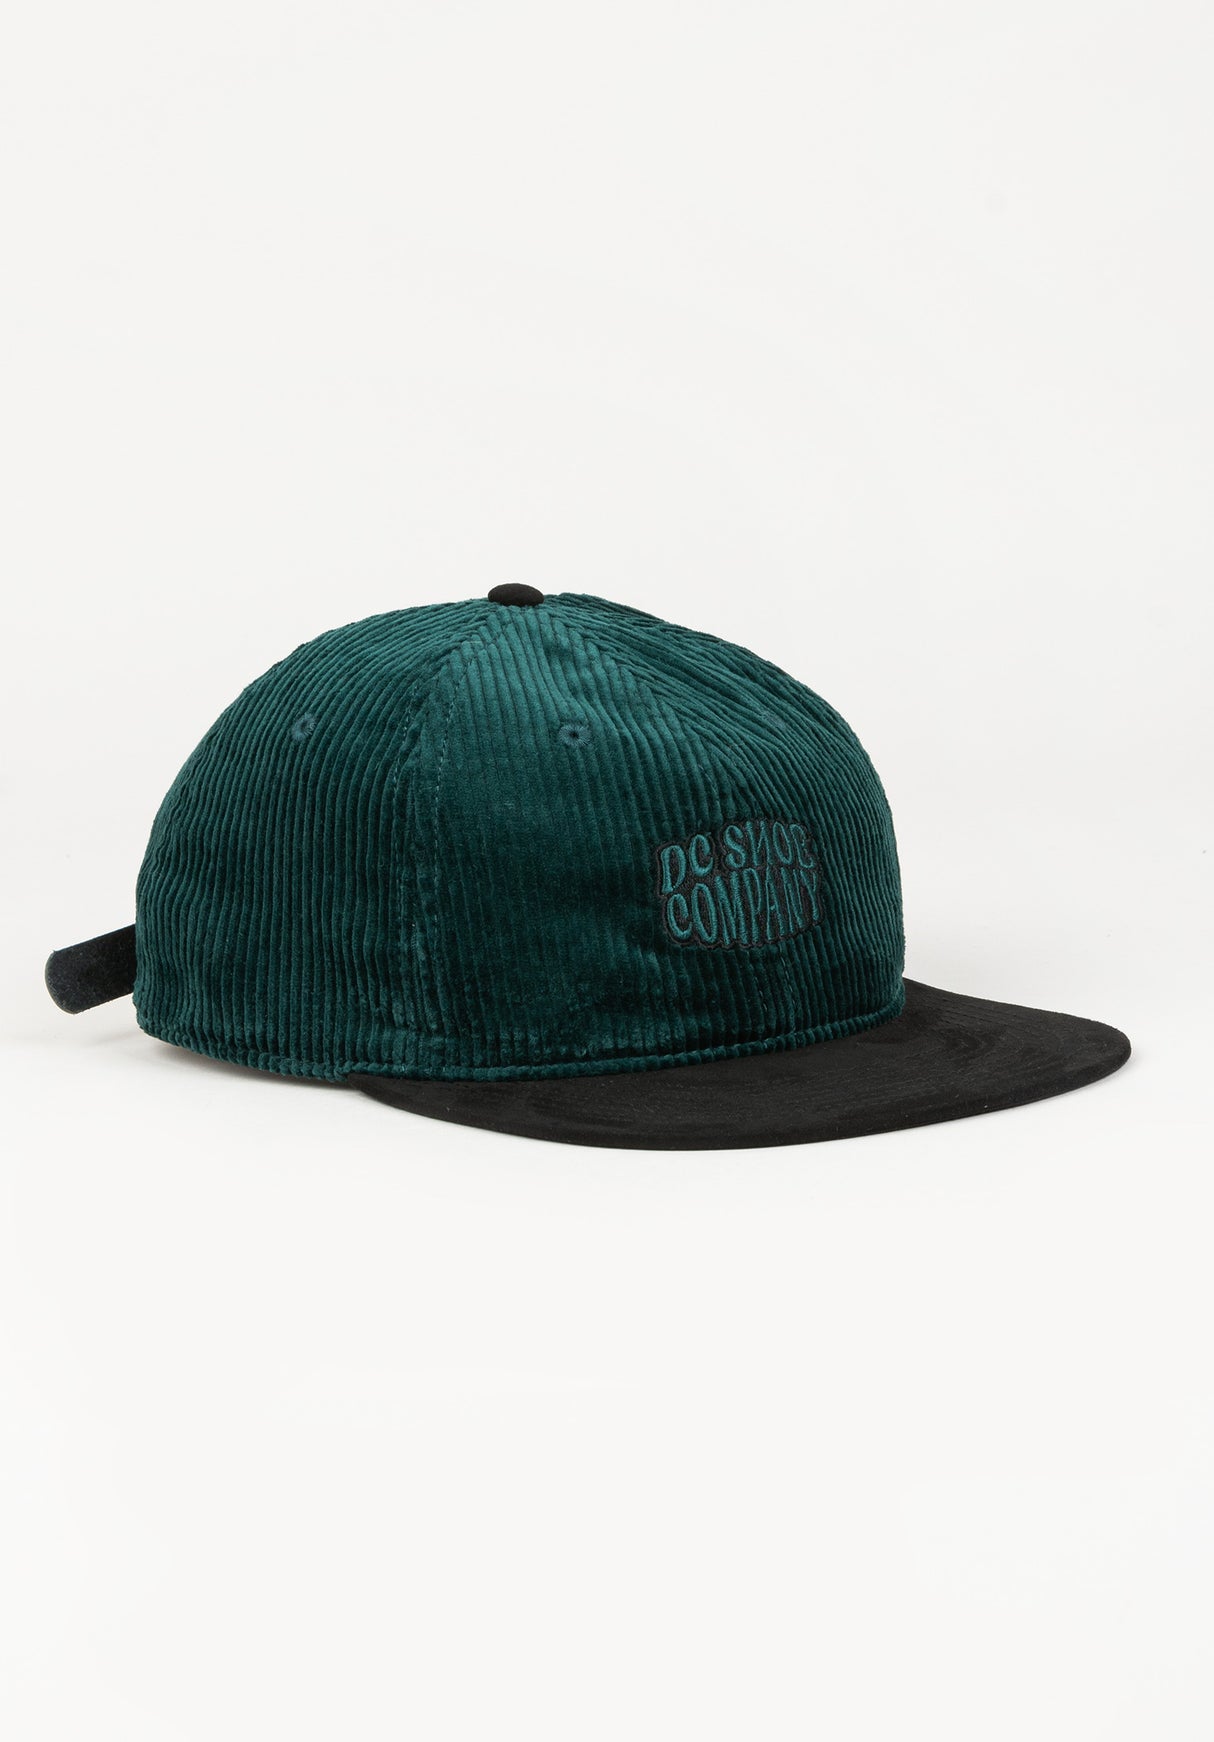 Men for Cap in DC – sycamore Shoes Strapback TITUS Cypher